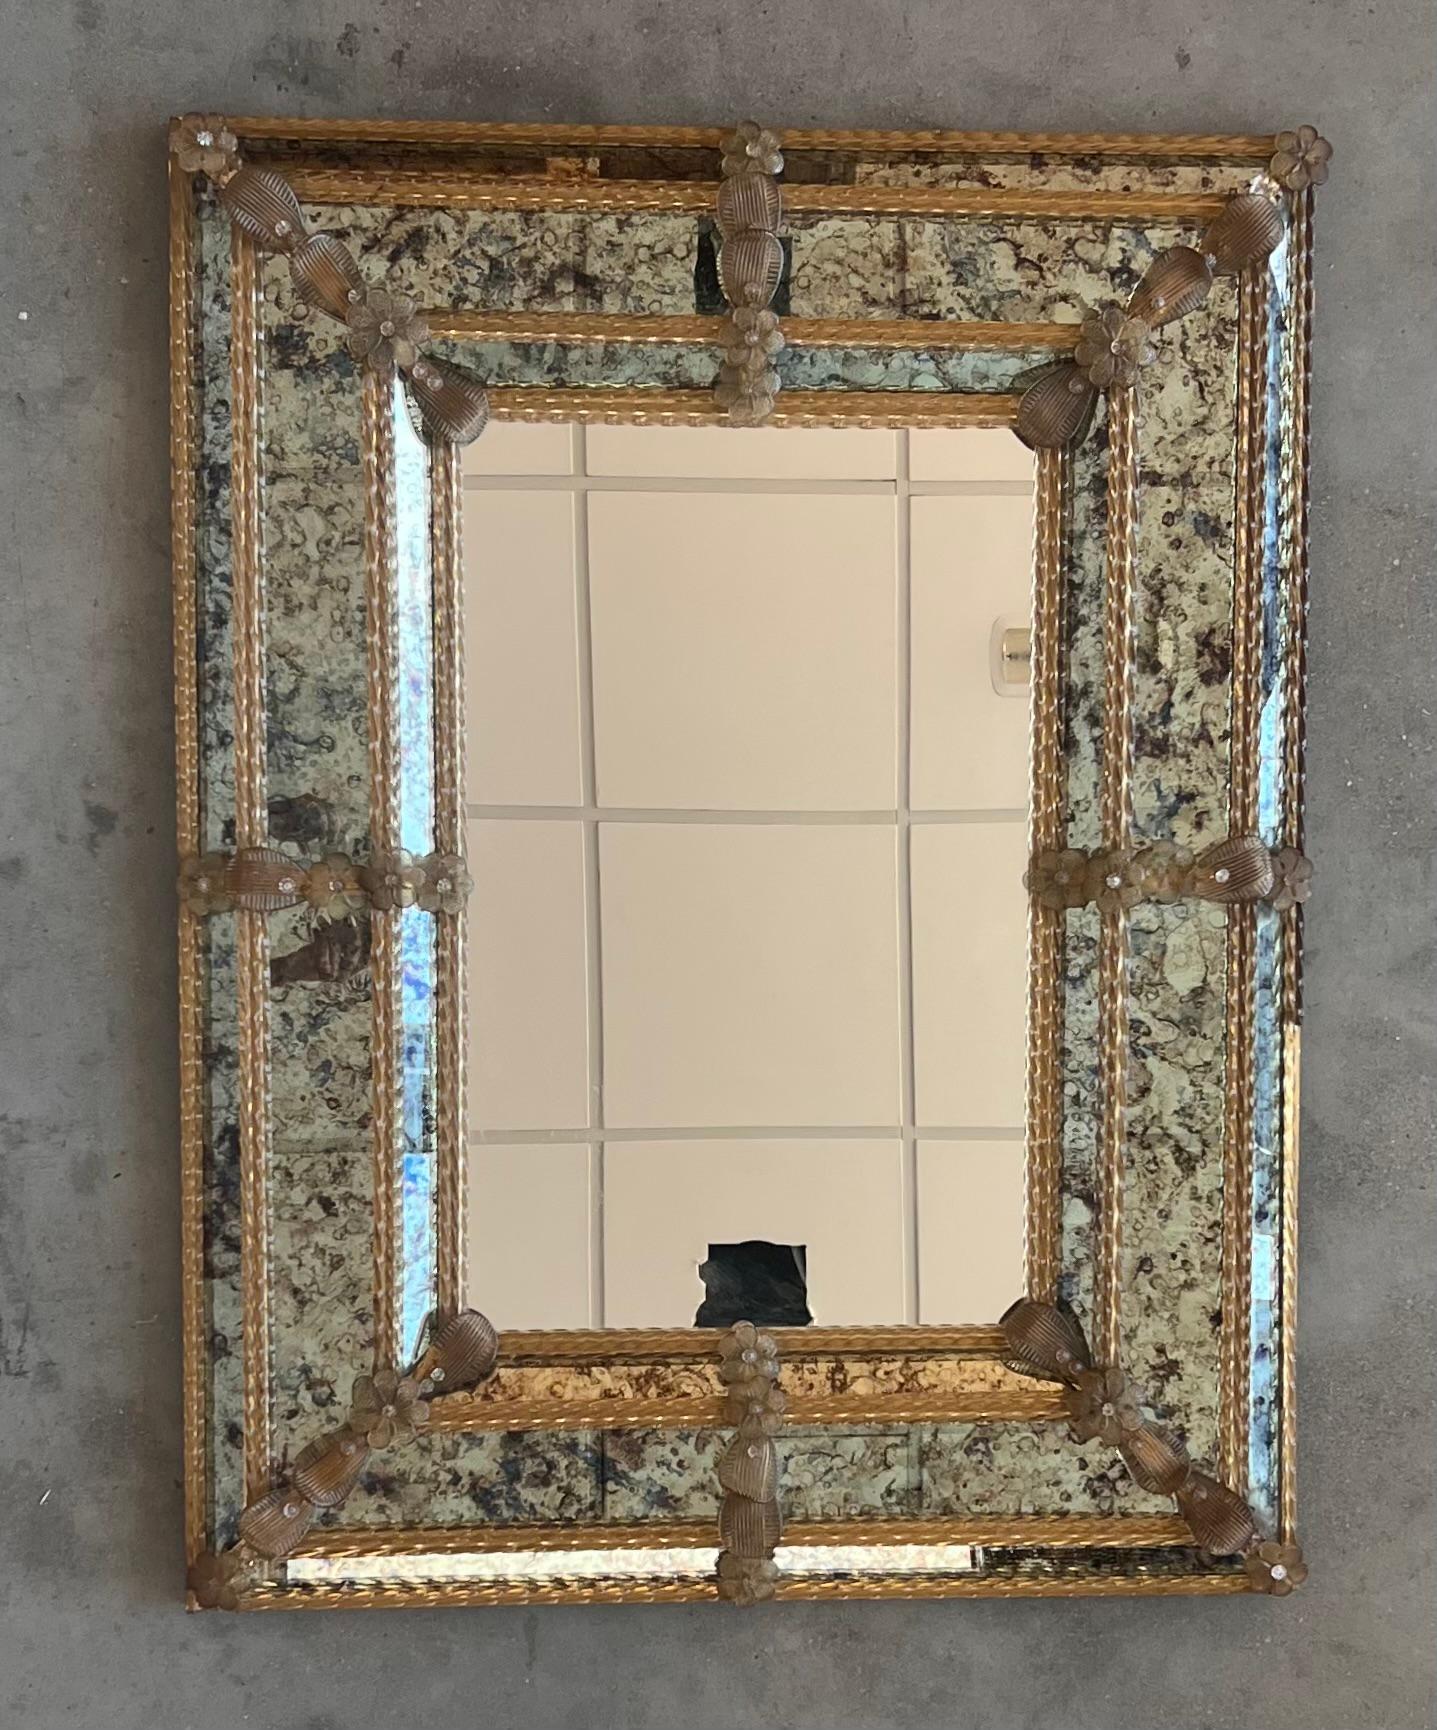 The square Venetian mirror has beveled panels and carved reliefs the  mirror has been handmade and hand silvered. The central panel shows a light antiquing finish while the surround has a heavier antiquing.